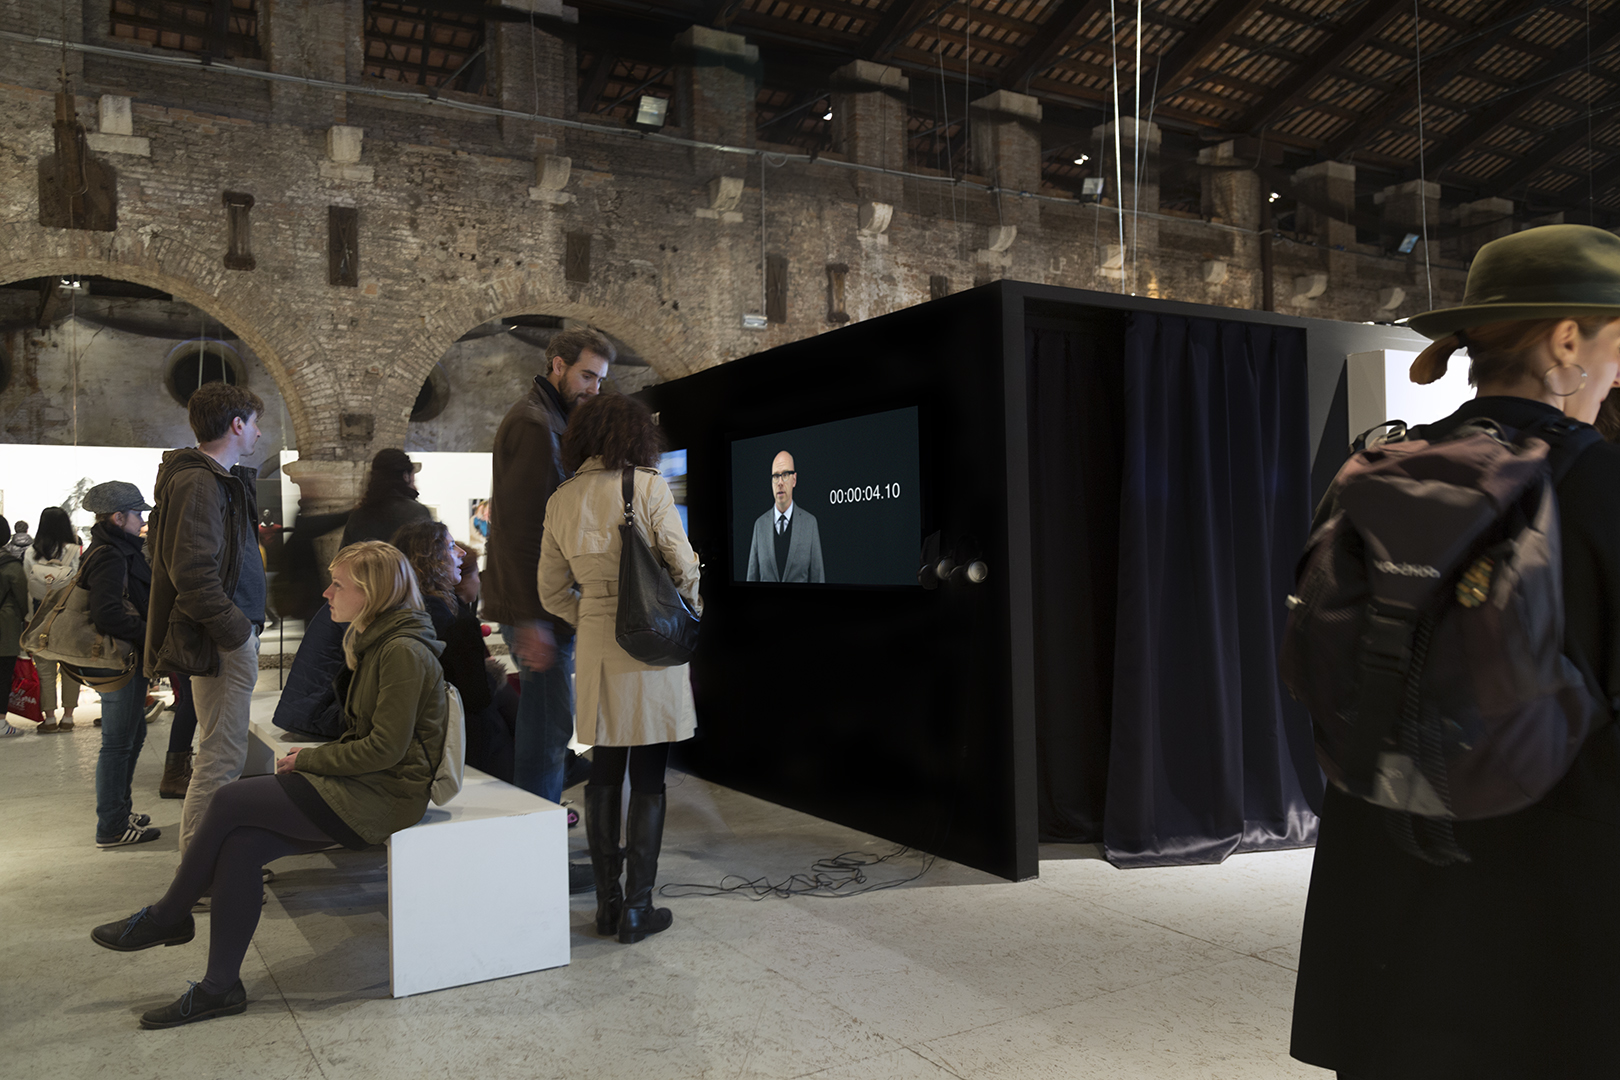     Pandere    r (Seventeen Seconds) ,   2016    Single-Channel Video Installed at the Arsenale   —   Venice, Italy  